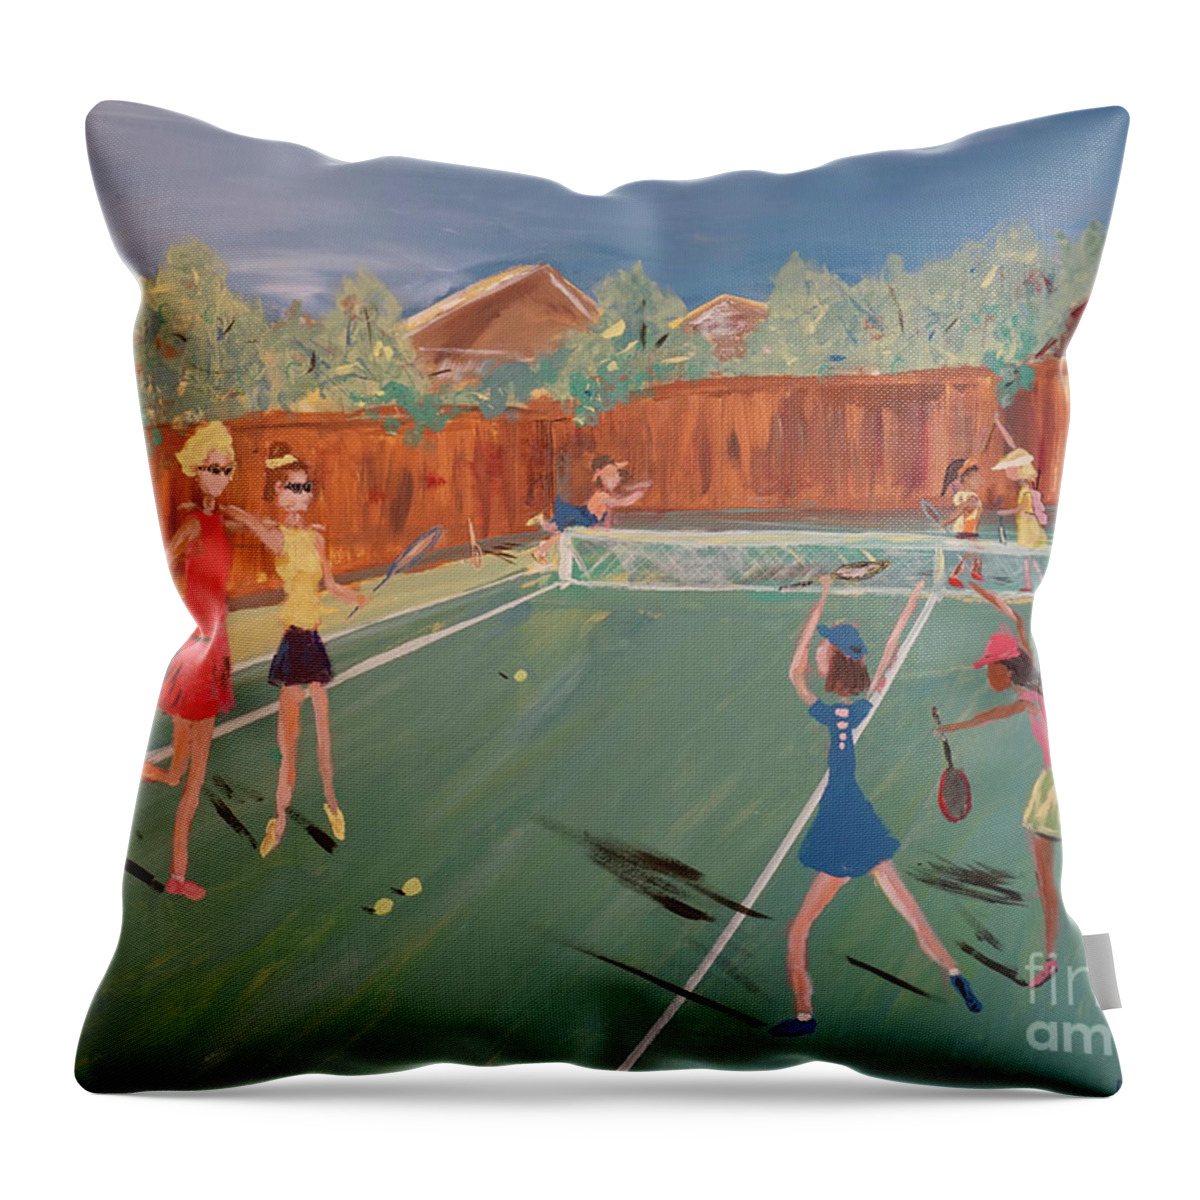 Tennis Girls Throw Pillow featuring the painting Tennis Girls by Patty Donoghue